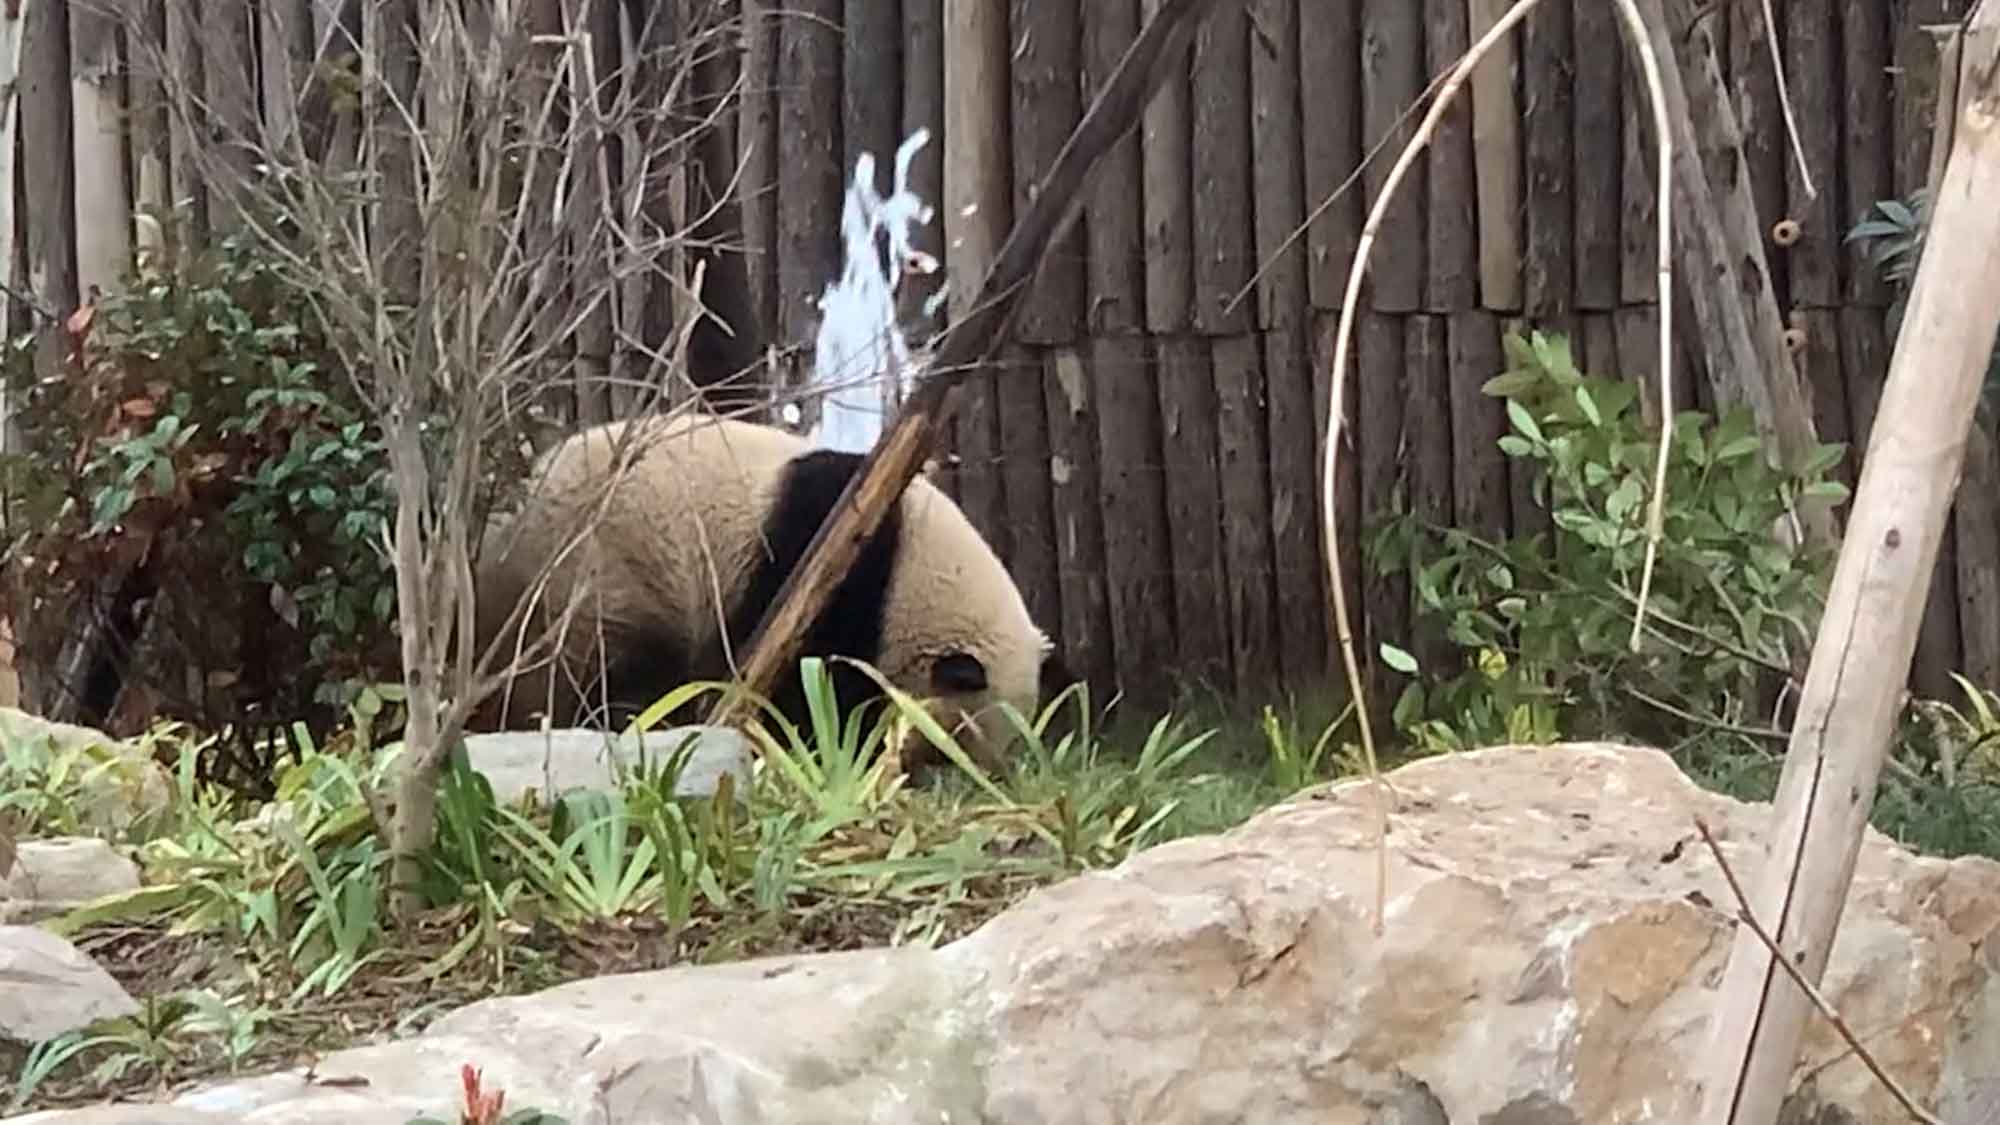 Hilarious Moment Panda Attempts To Fix Water Leak It Caused